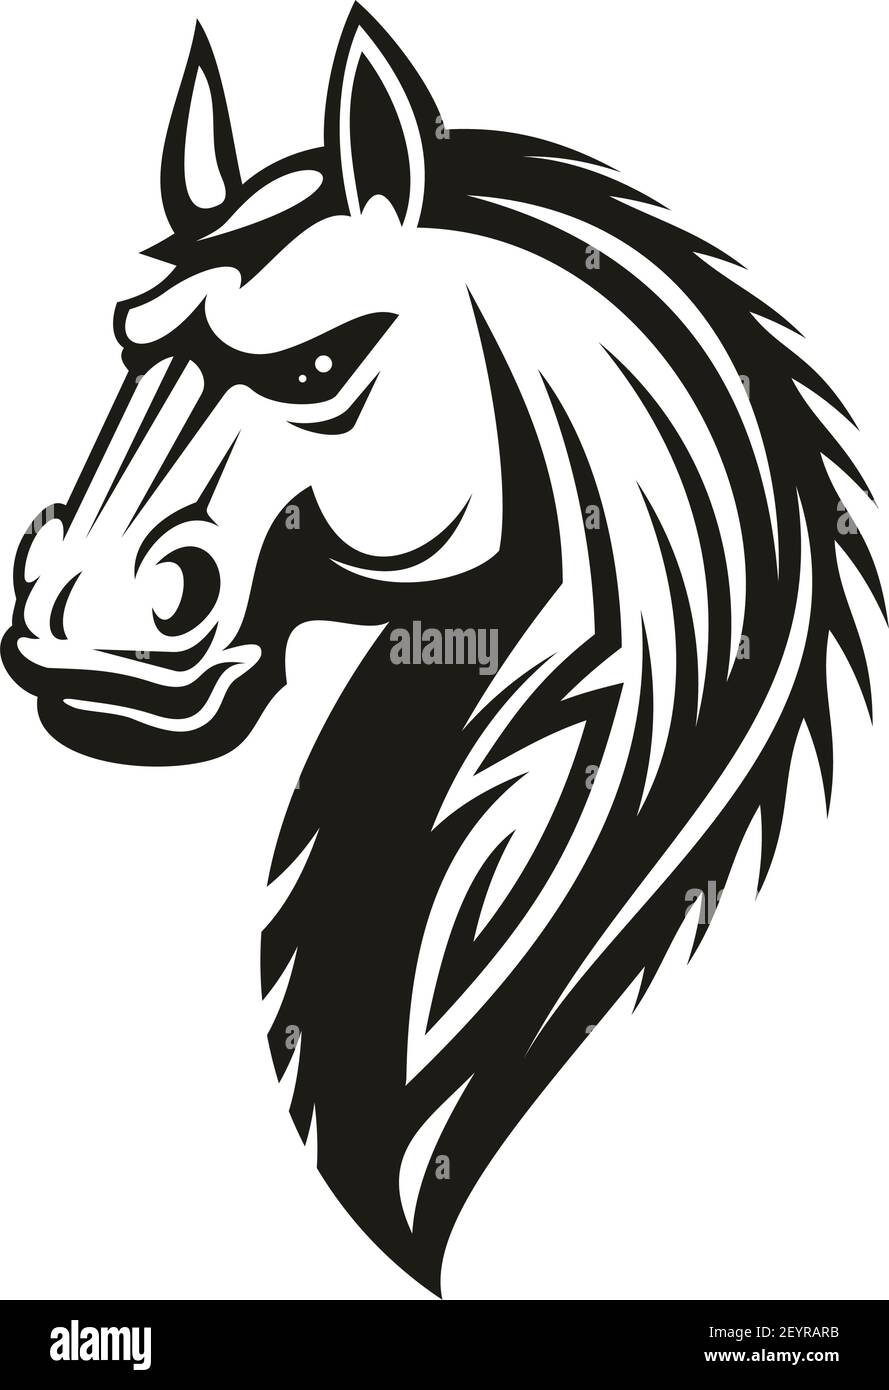 Horse head and neck Stock Vector Images - Alamy